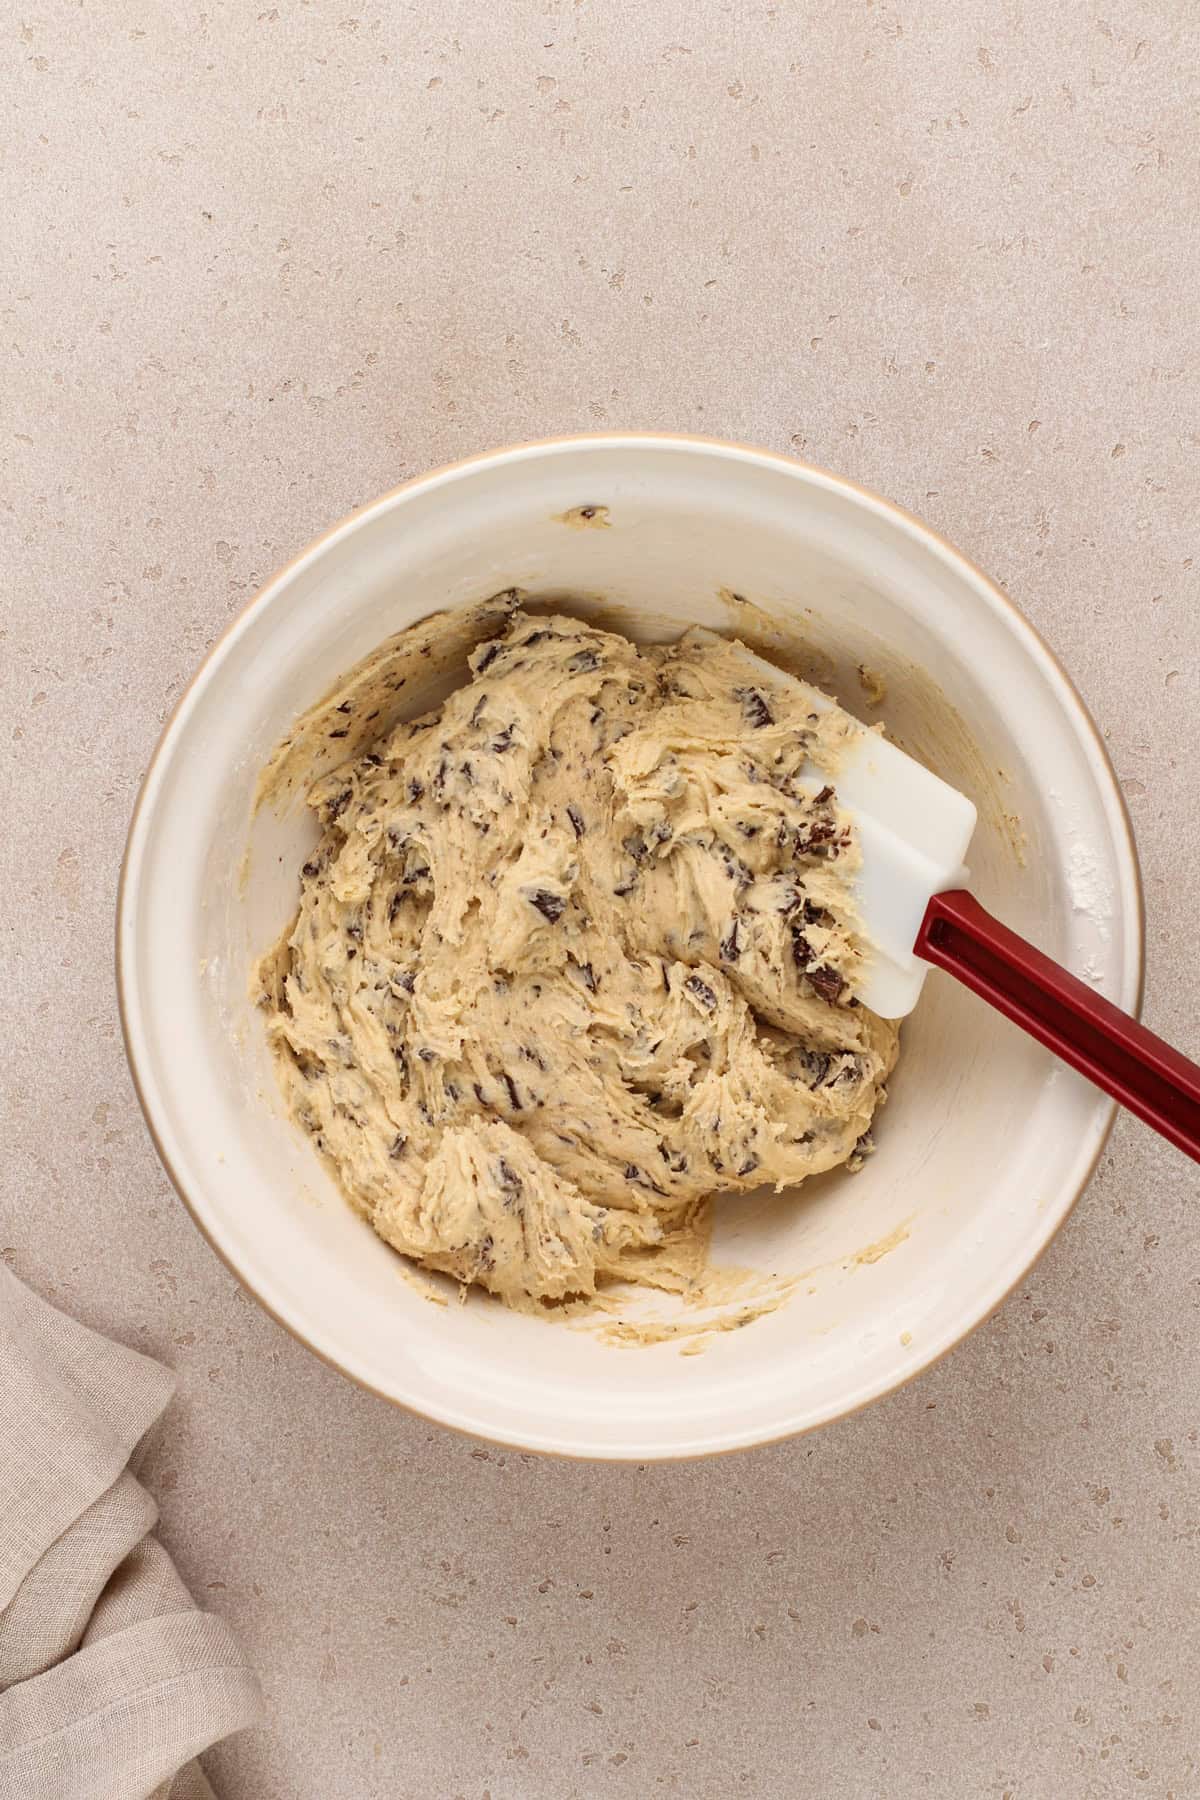 Easy chocolate chip cookie dough in a ceramic mixing bowl.